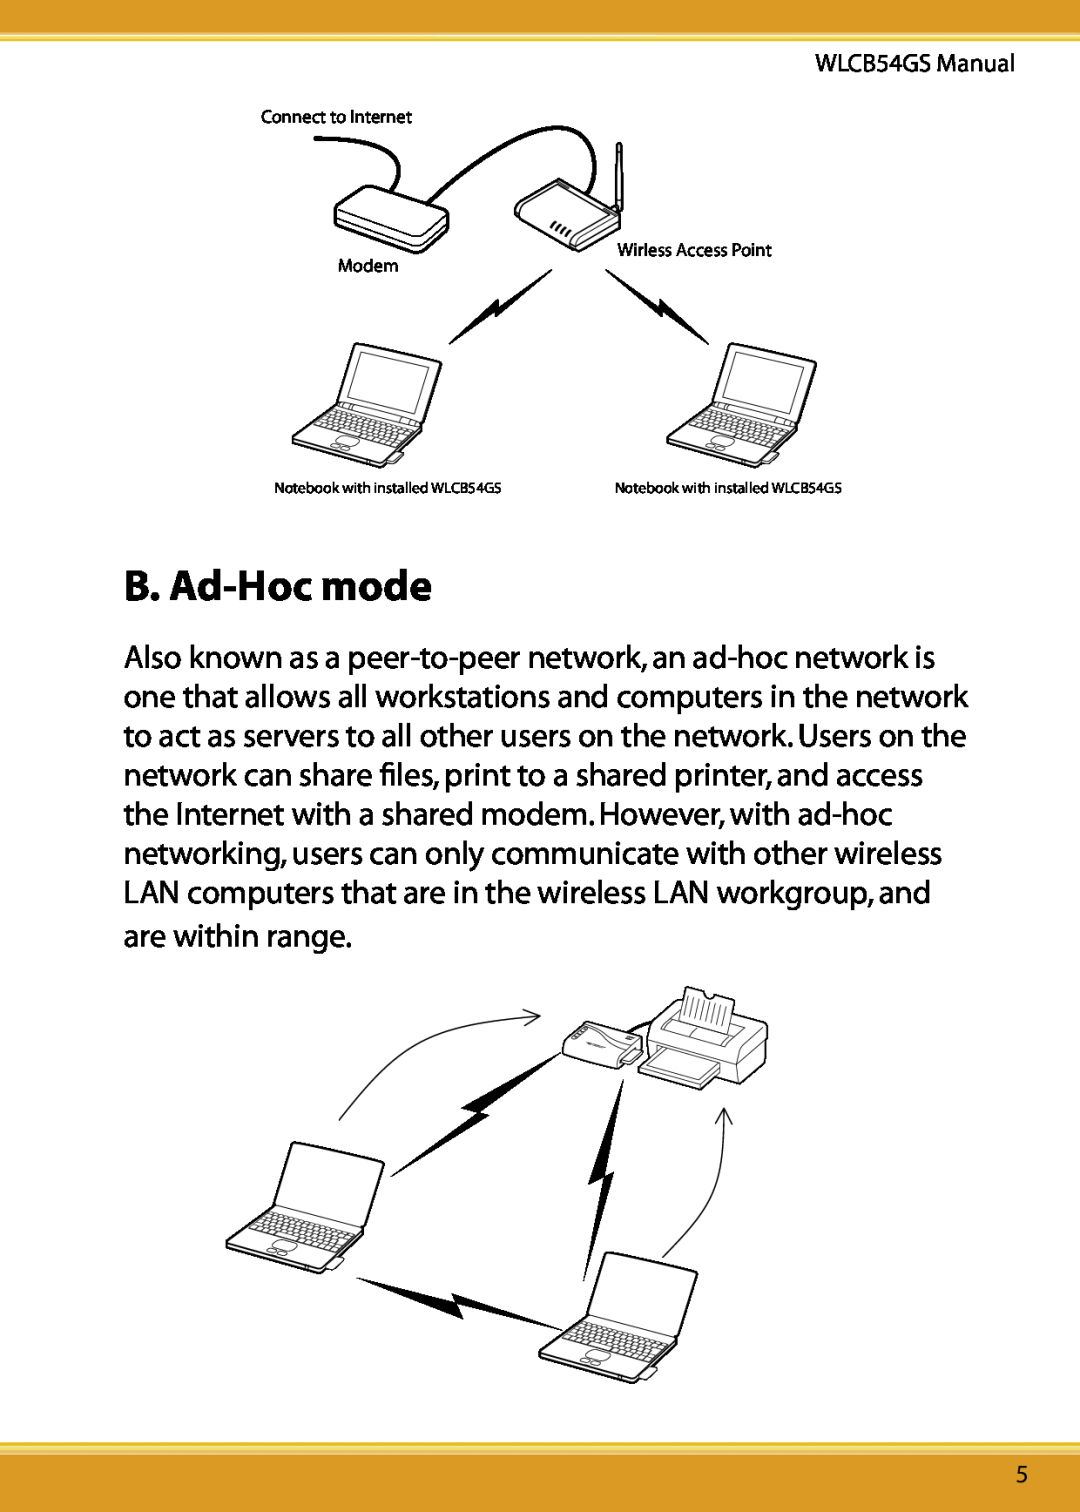 Corega 108M user manual B. Ad-Hoc mode, Connect to Internet Wirless Access Point Modem 